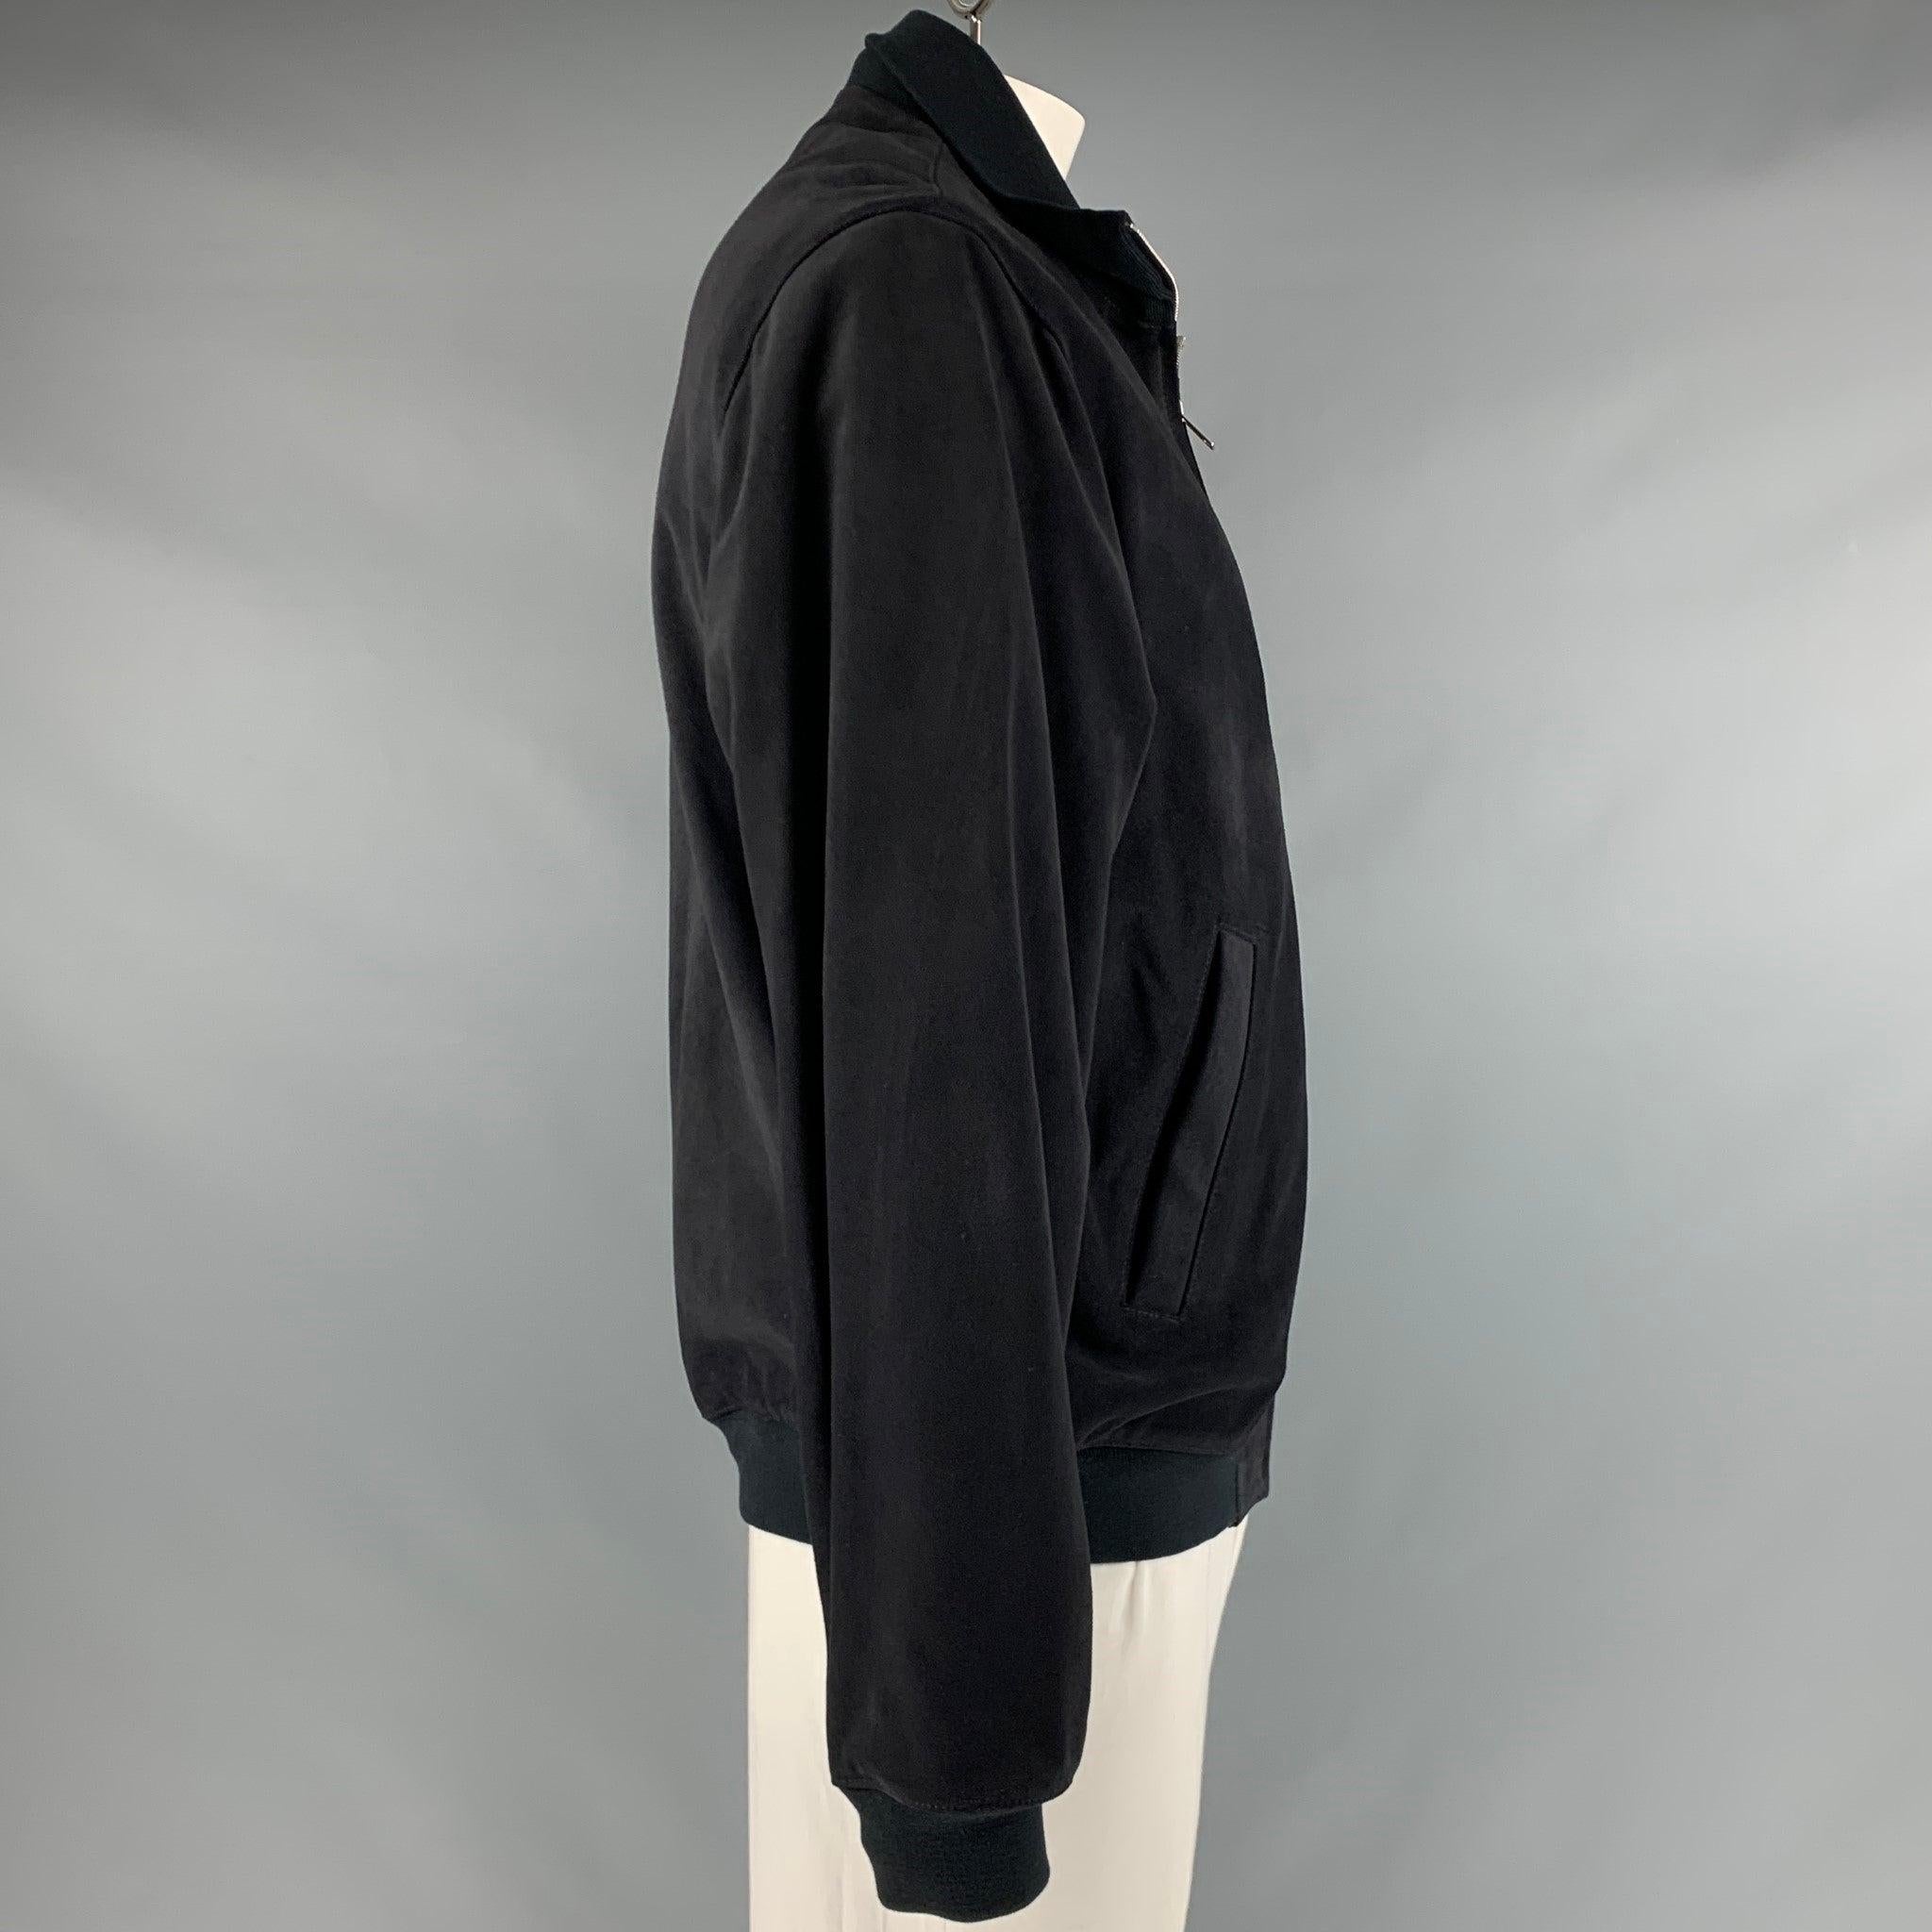 SANDRO
jacket in a black suede fabric featuring a bomber style, two slit pockets, a ribbed collar, and a zip up closure. Excellent Pre-Owned Condition. 

Marked:   XXL 

Measurements: 
 
Shoulder: 18.5 inches Chest: 48 inches Sleeve: 27 inches